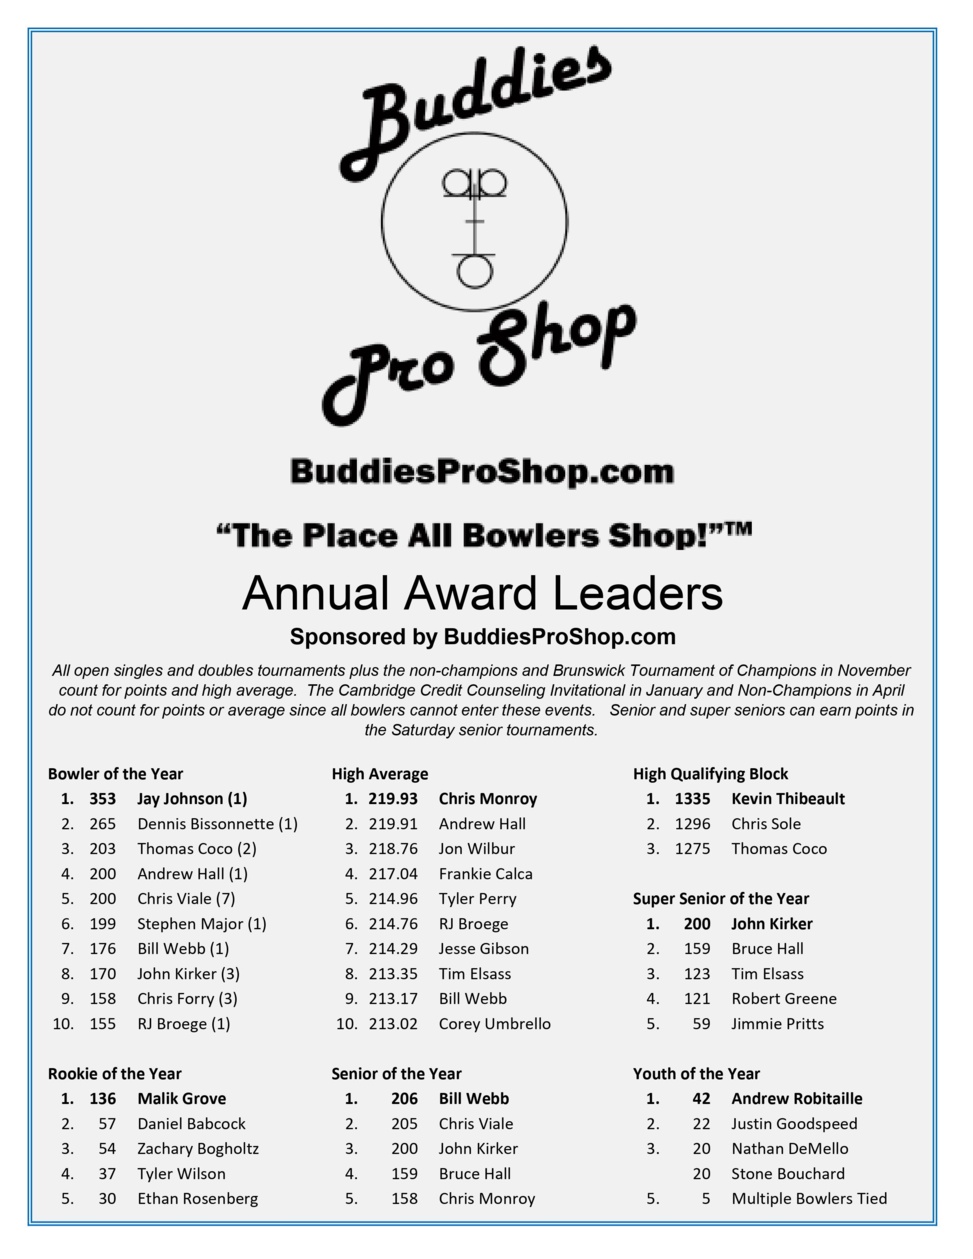 Current Stats and BuddiesProShop.com Annual Award Leaders